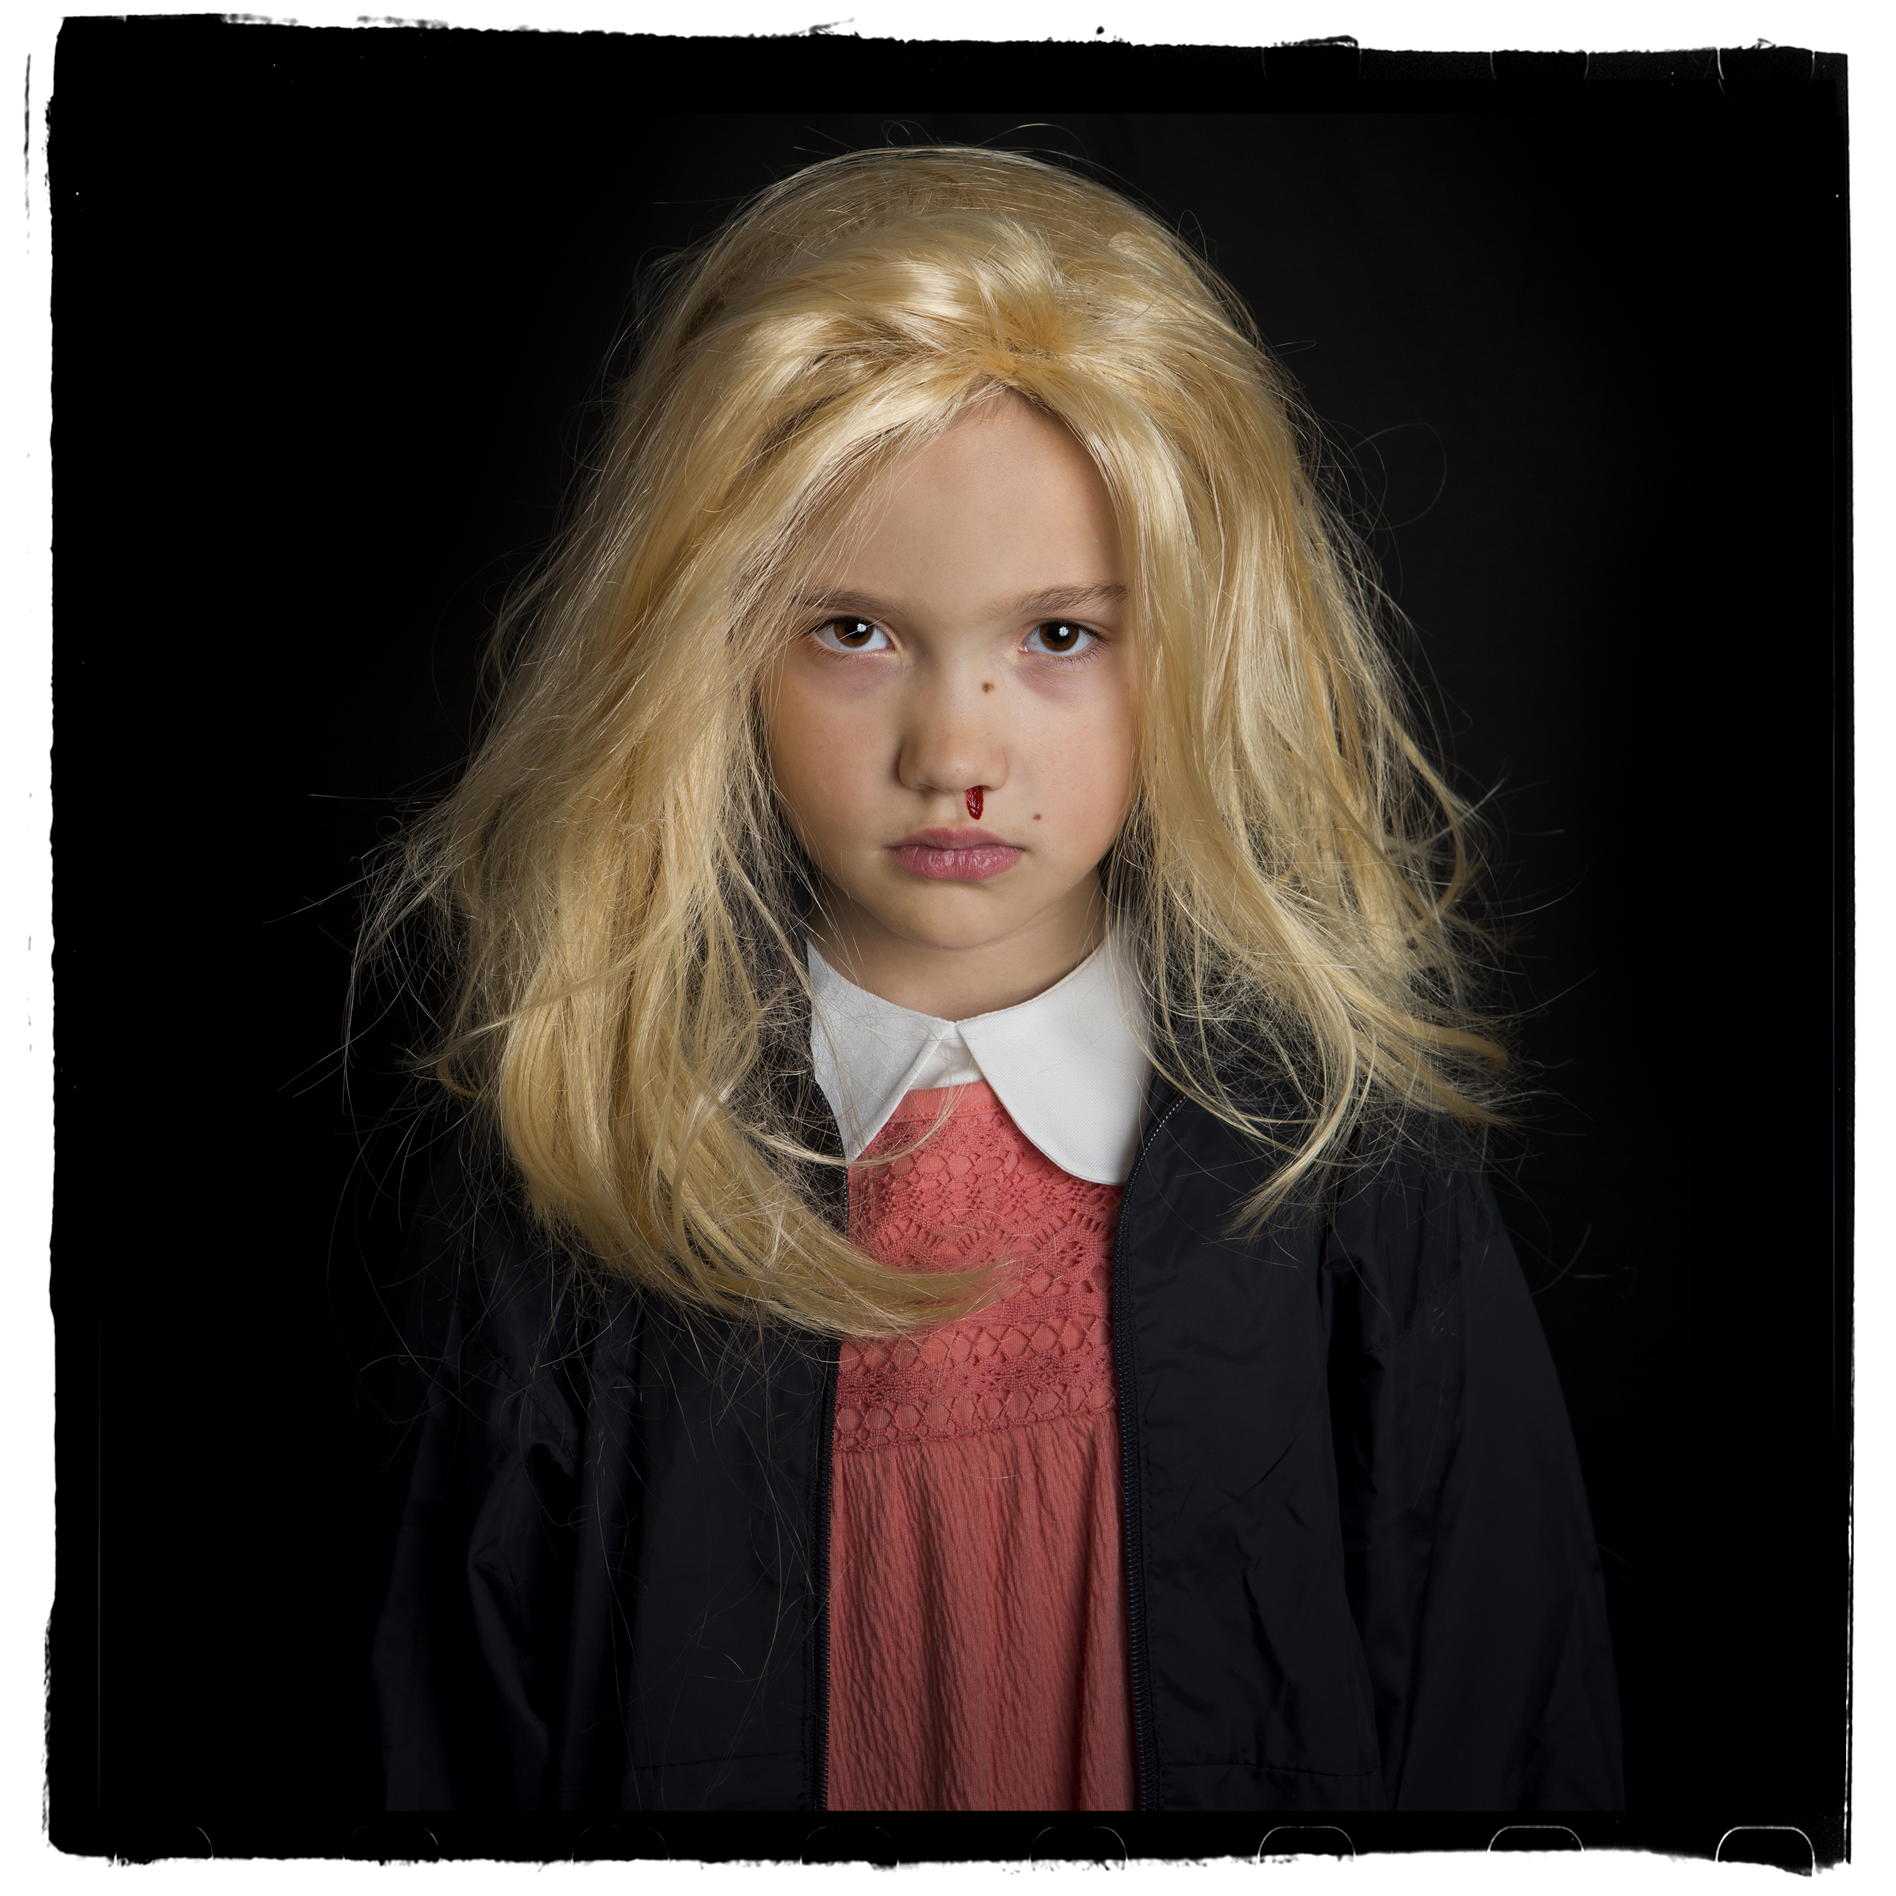 Chad Hunt’s Halloween Portraits Of Trick-Or-Treaters